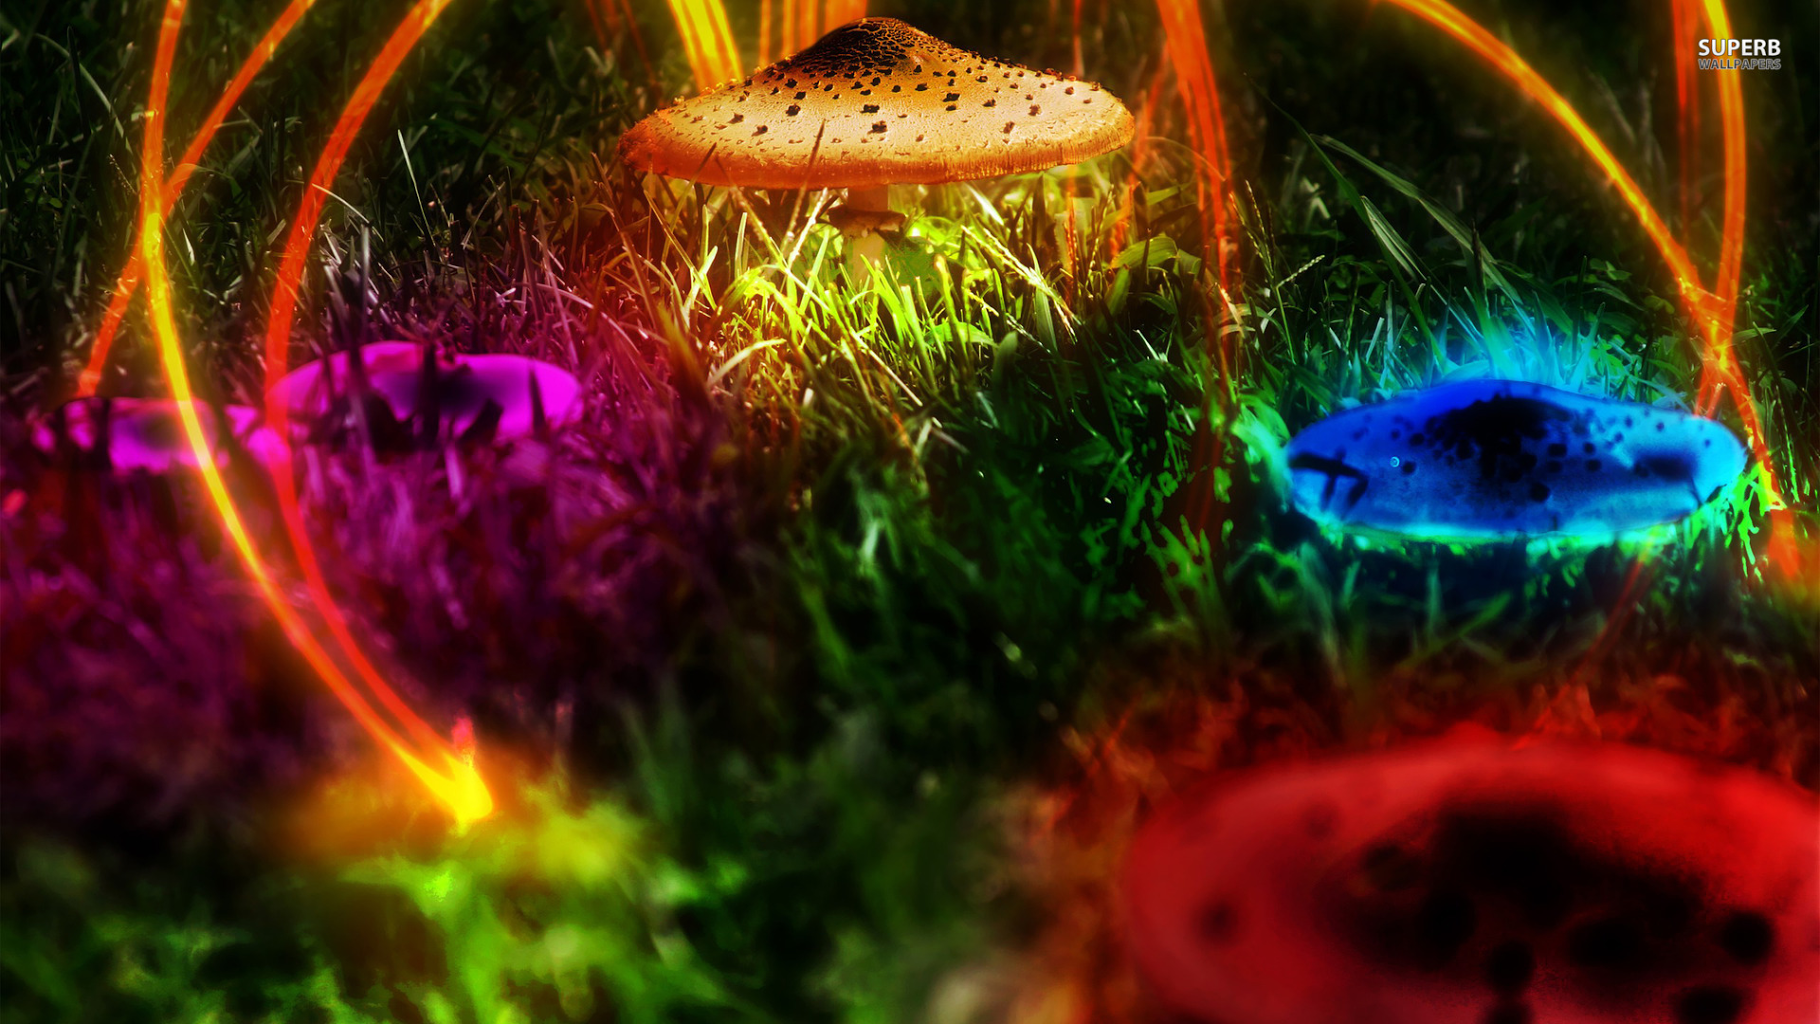 Amazing 3D Mushroom Free UHD   Android Apps Games on Brothersoftcom